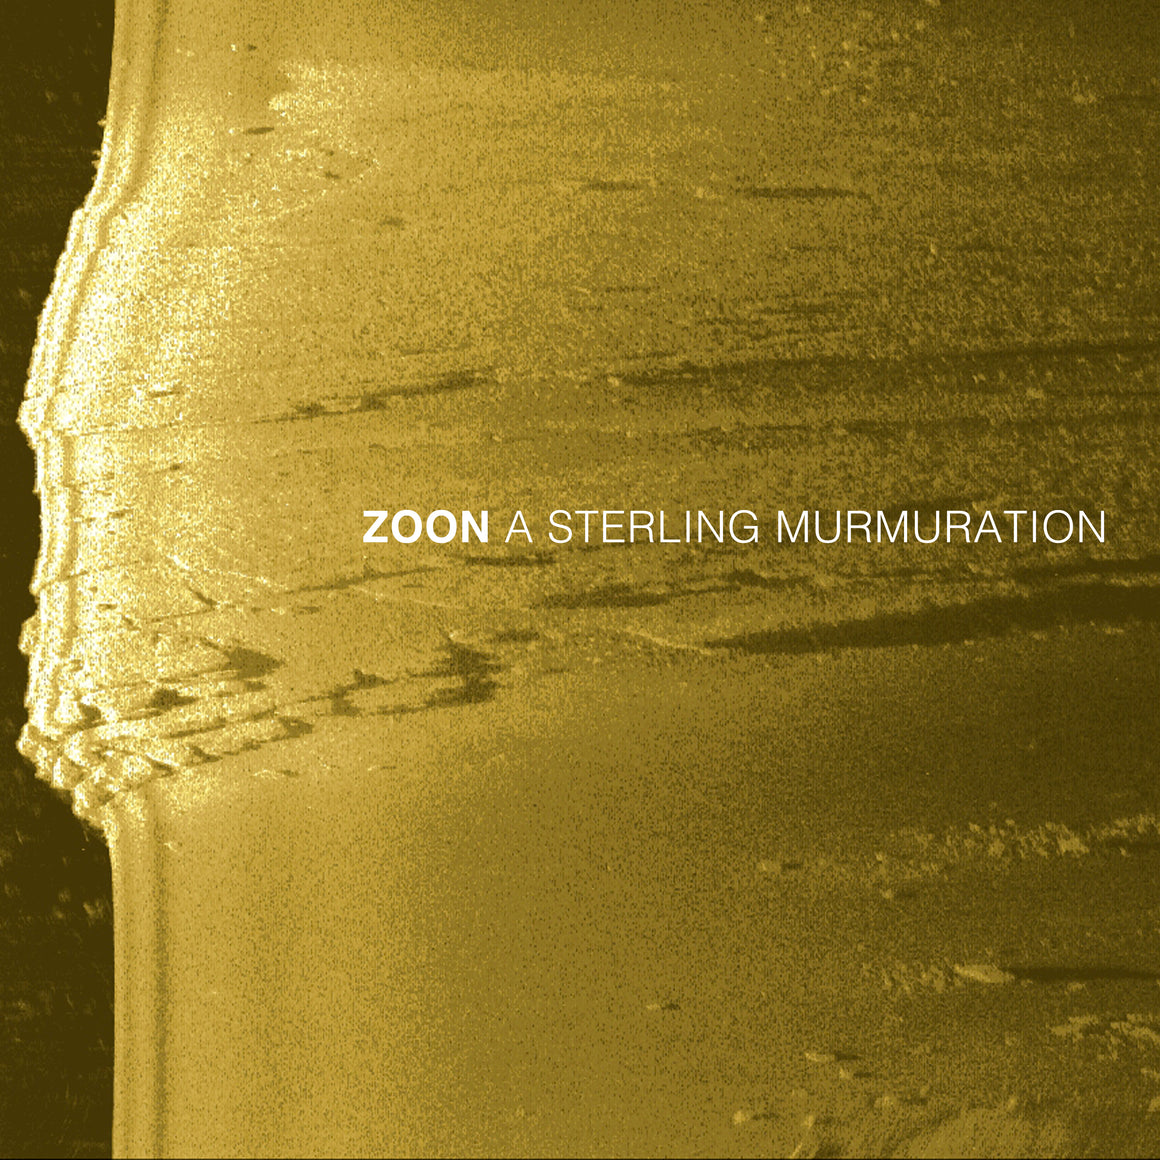 'A Sterling Murmuration' EP